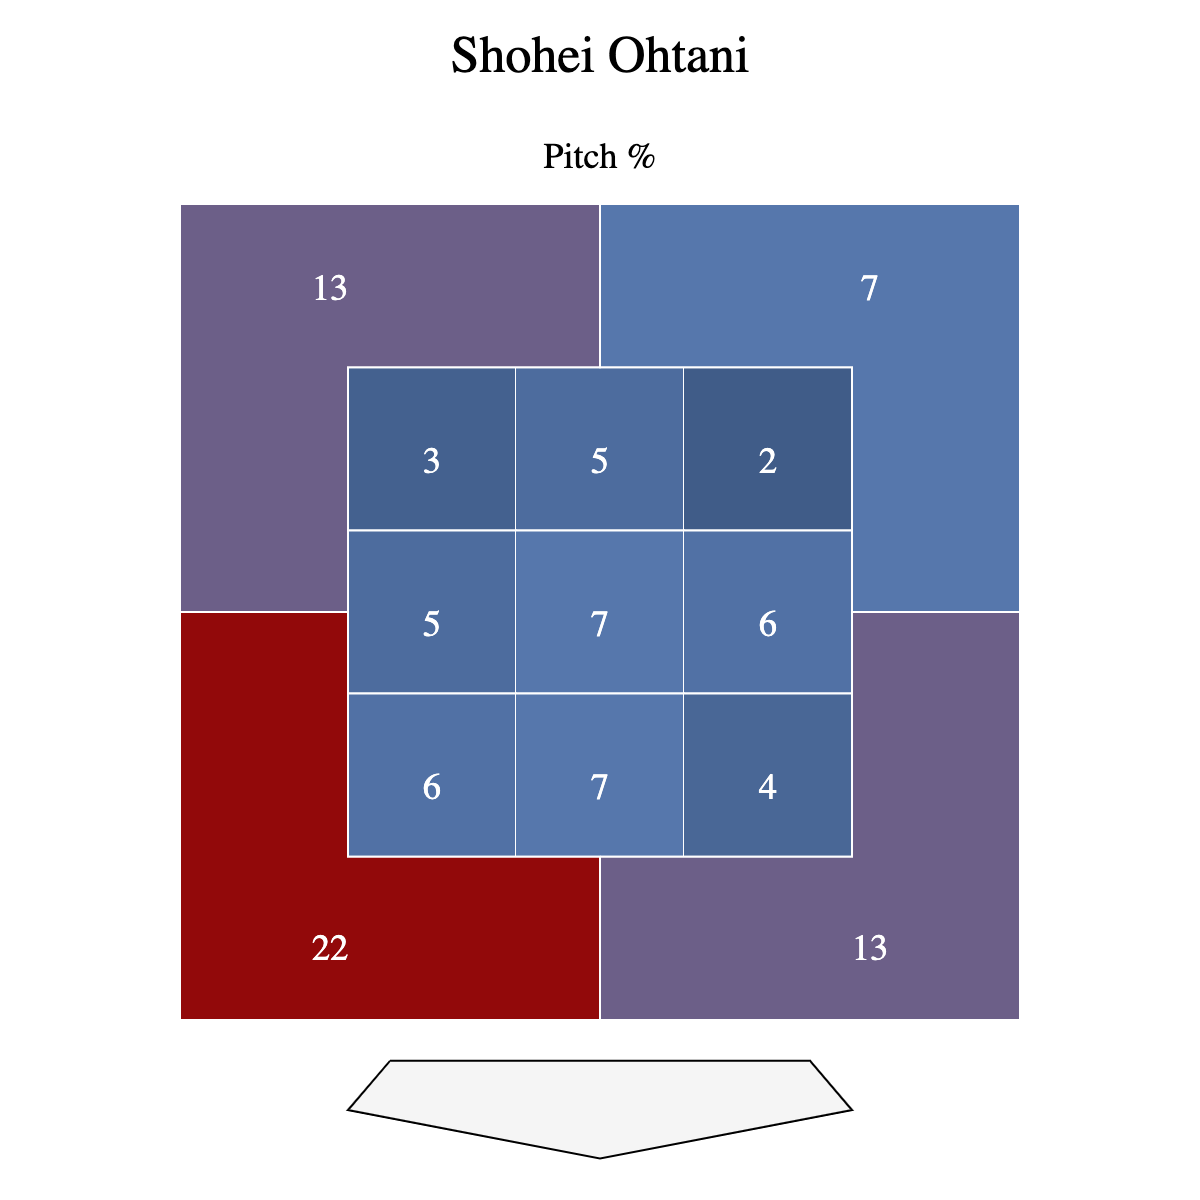 How opposing pitchers are throwing to Shohei Ohtani